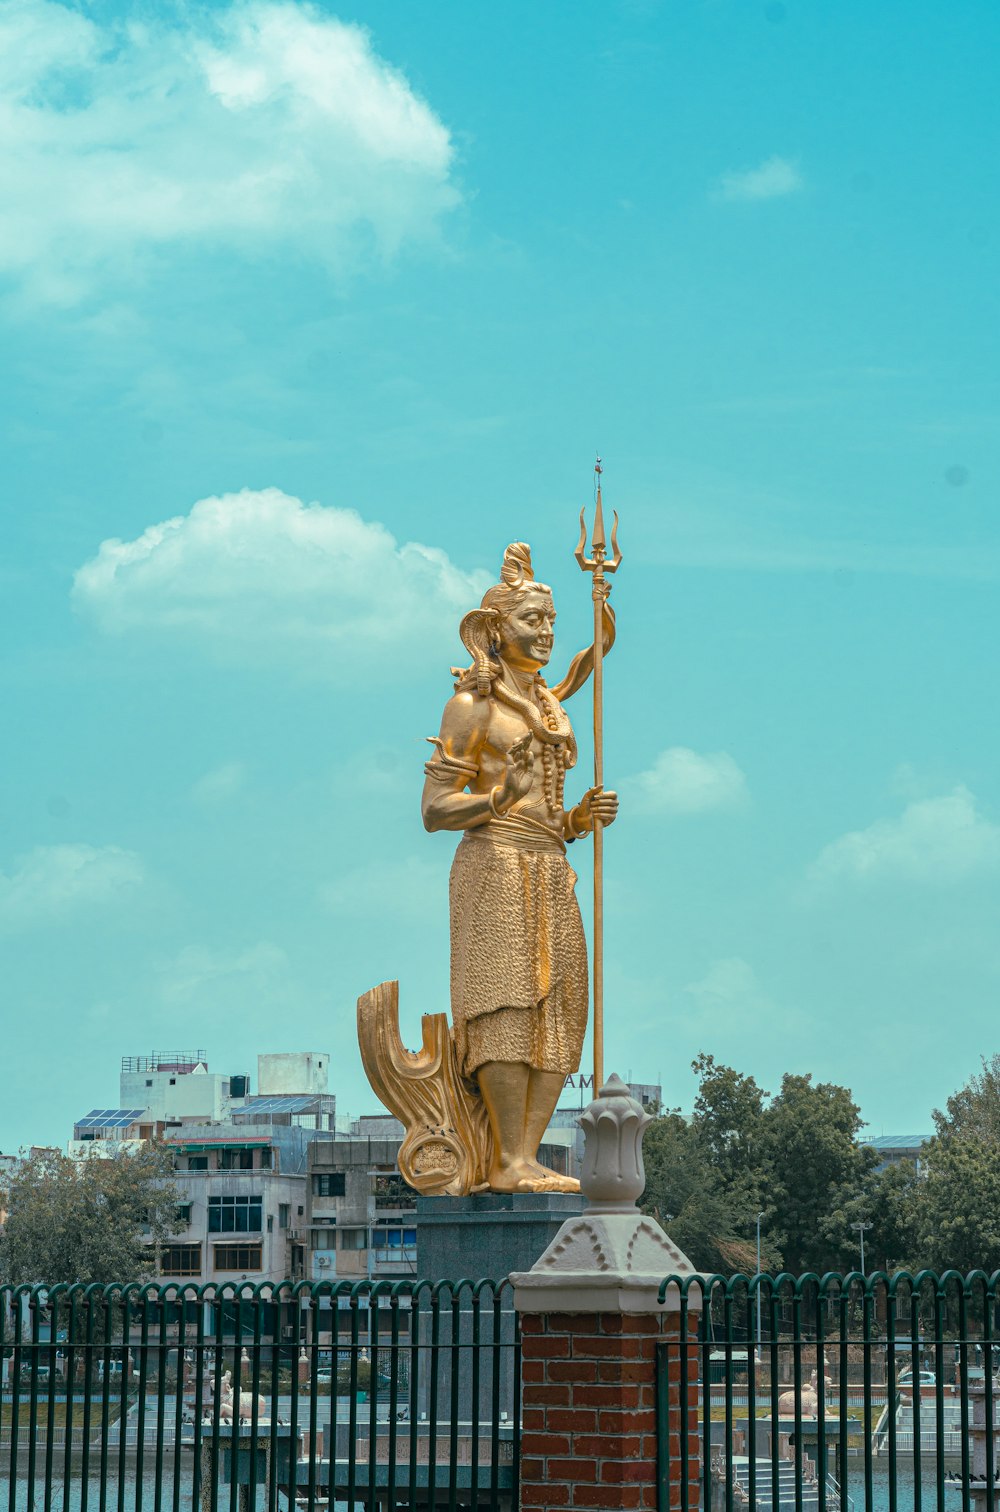 a golden statue of a woman holding a spear